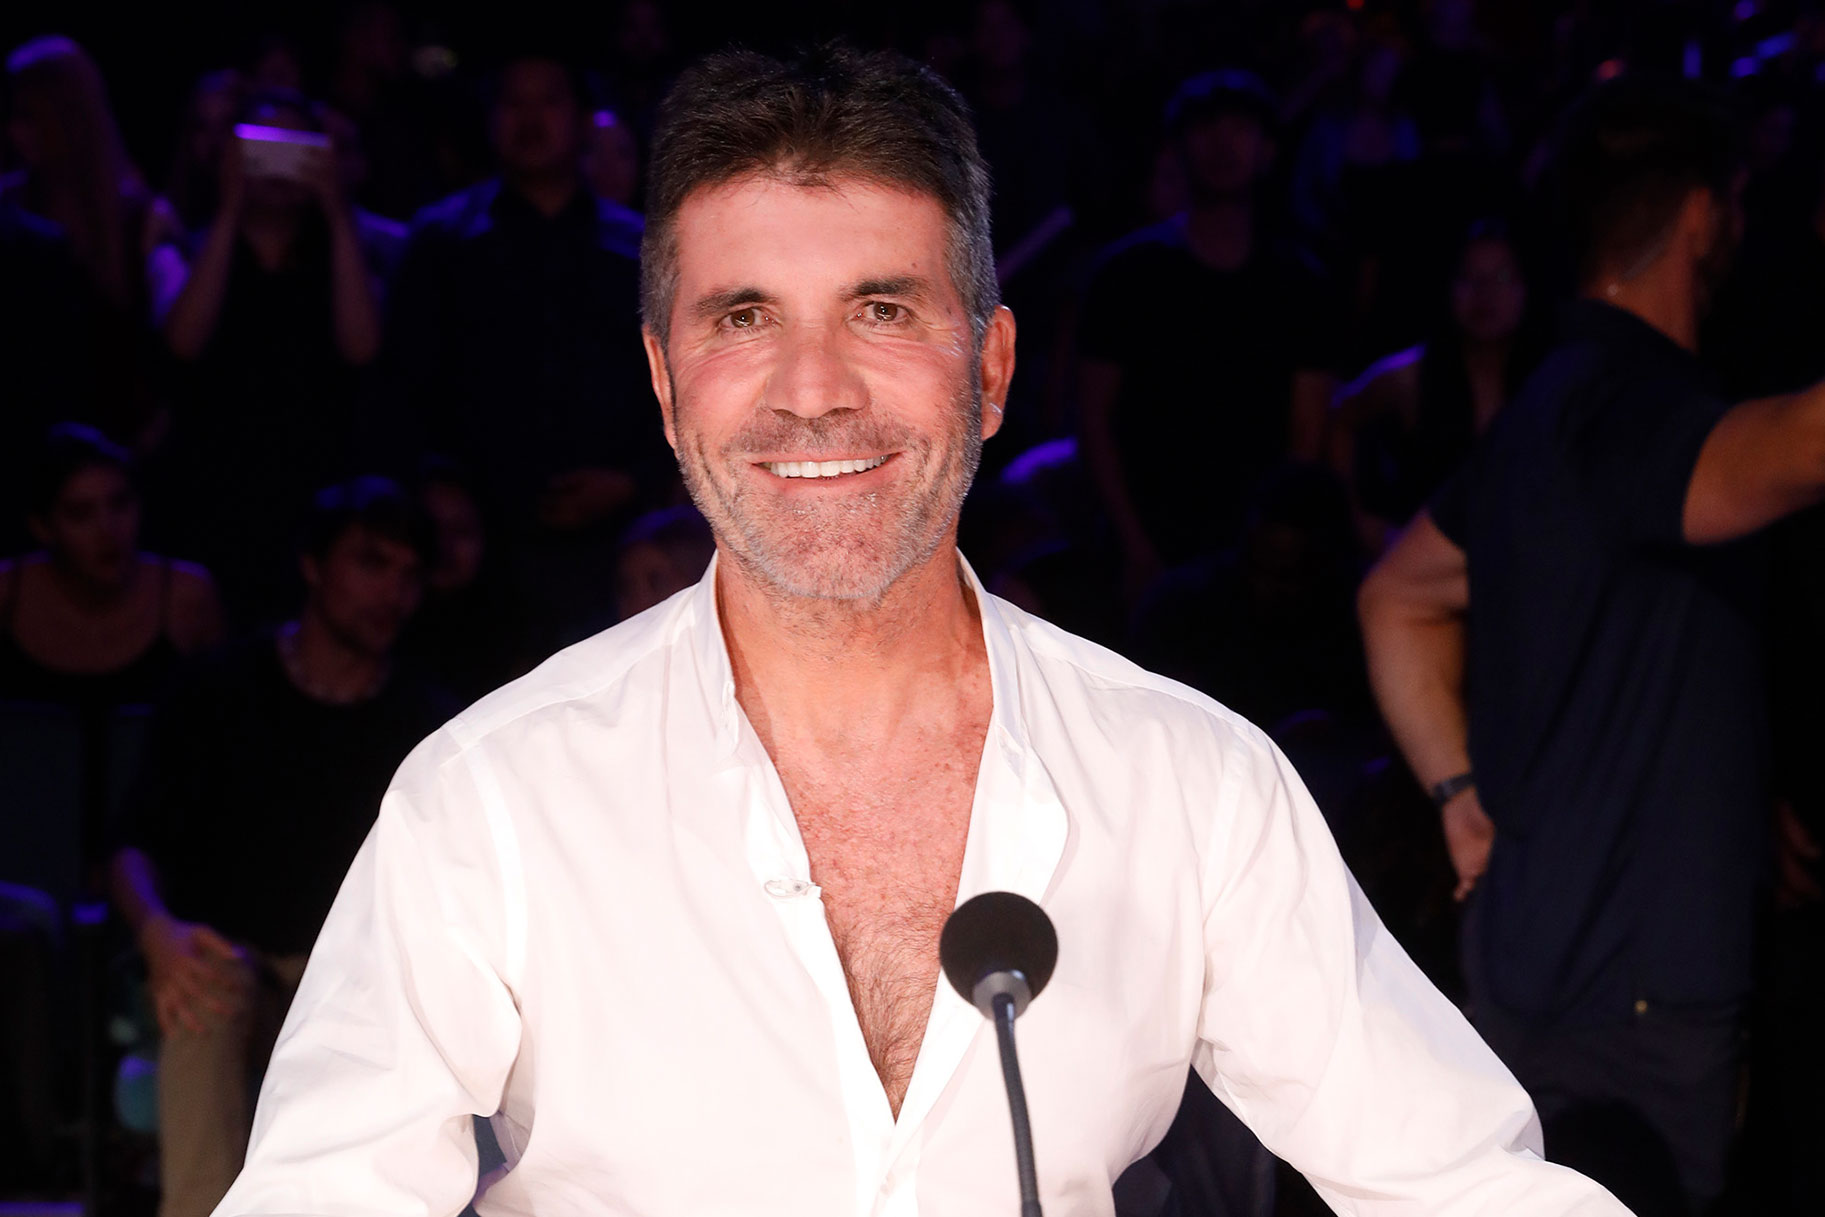 Simon Cowell at the finale